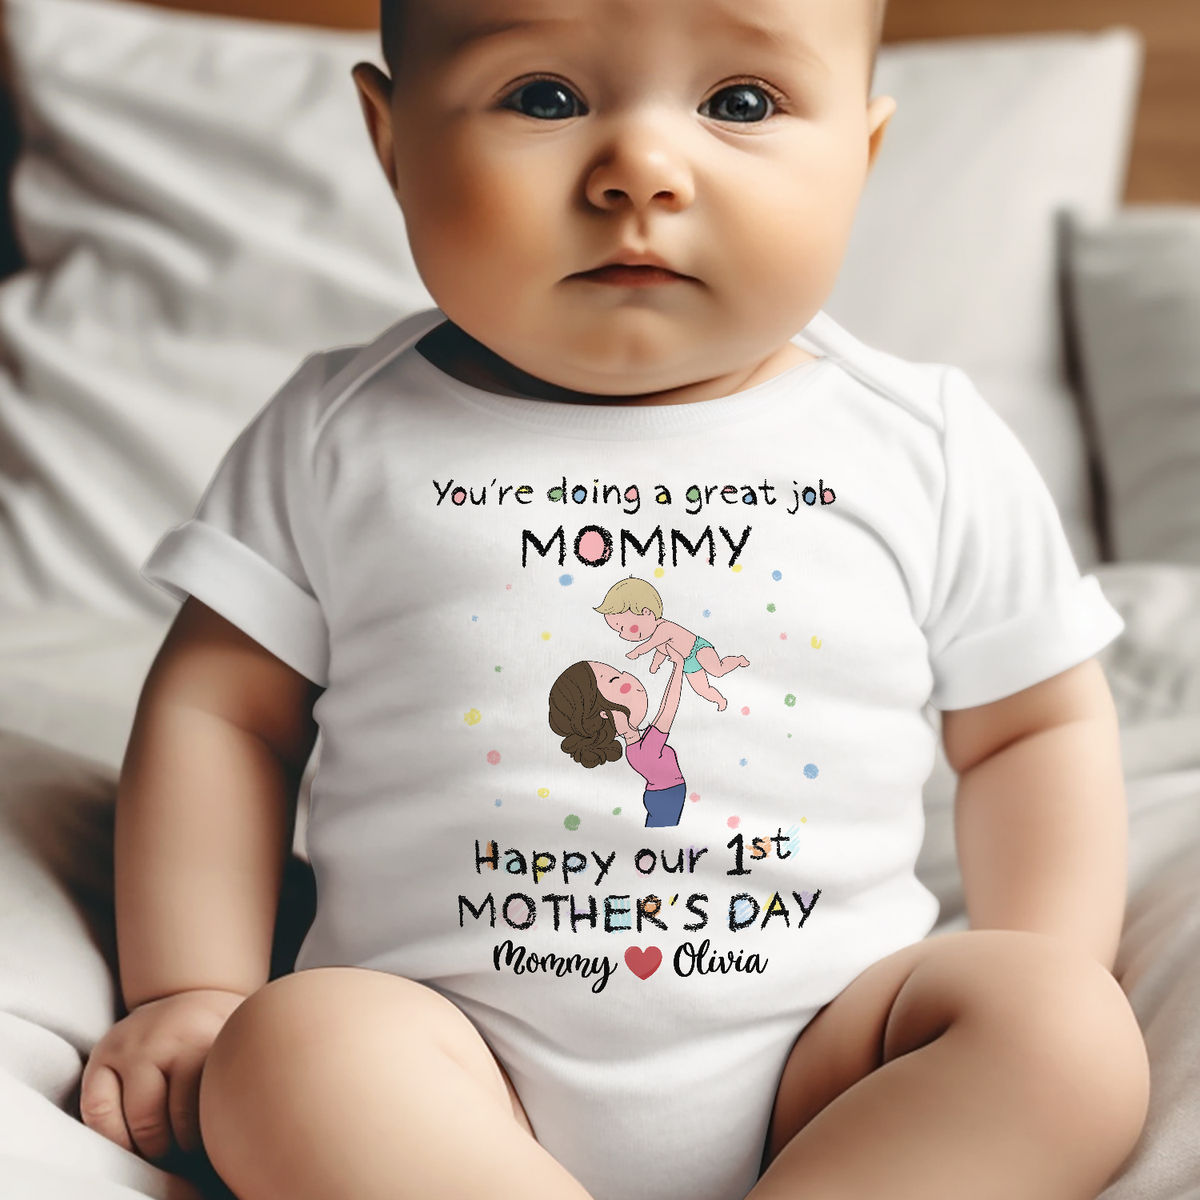 Custom Baby Onesies - You're doing a great job Mommy - Happy our 1st Mother's Day (27868) - Personalized Shirt_1